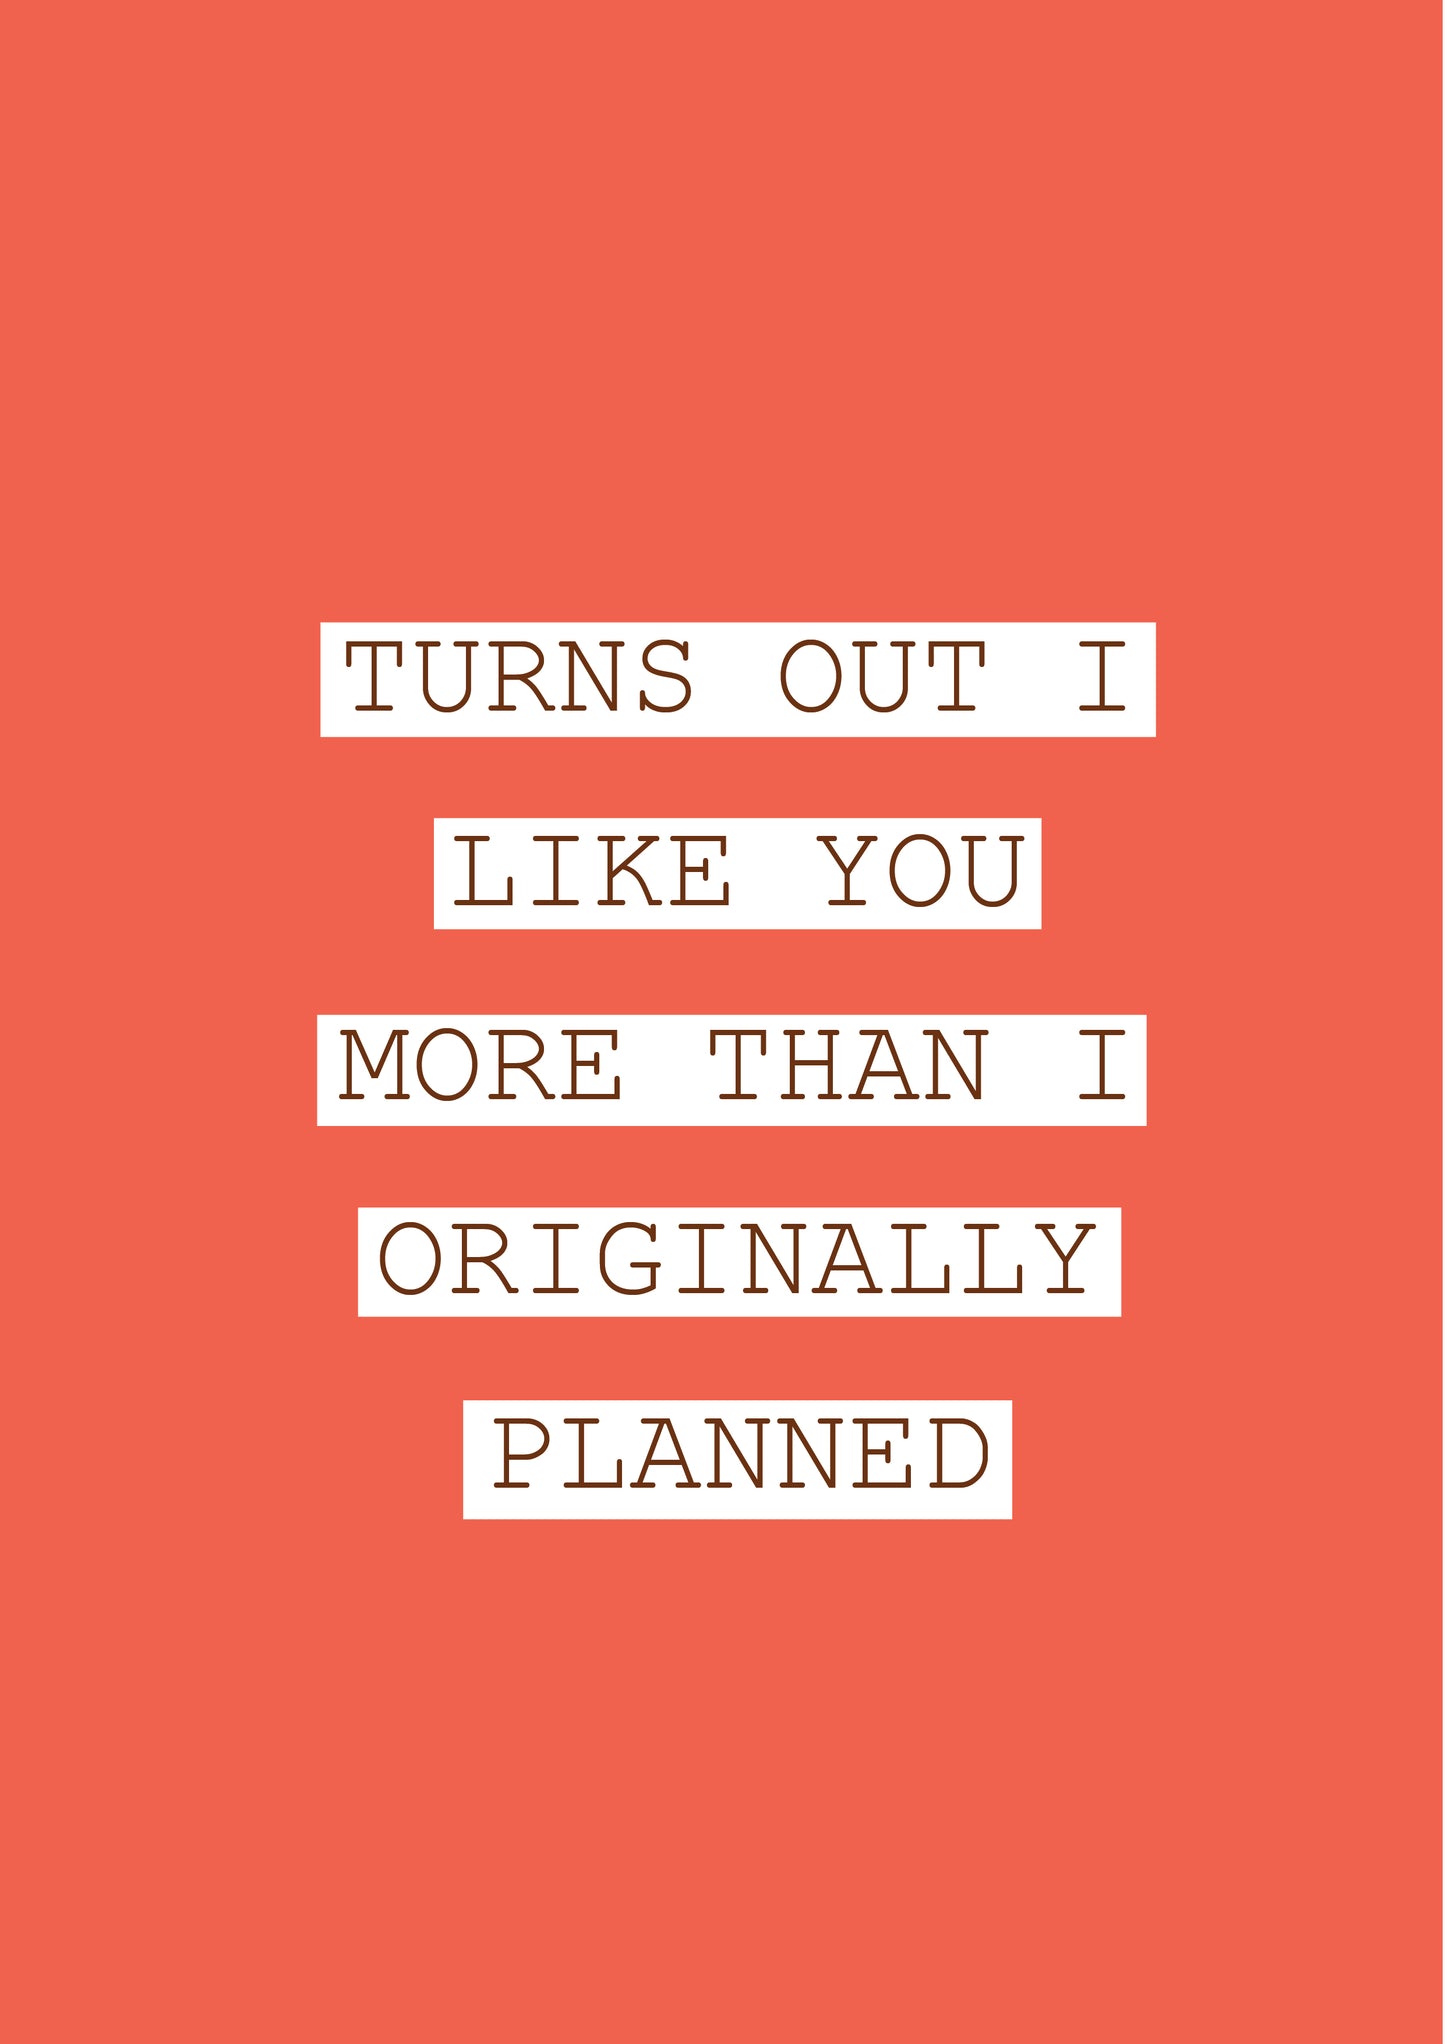 Valentine's Day Cards: Turns Out I Like You More Than I Originally Planned